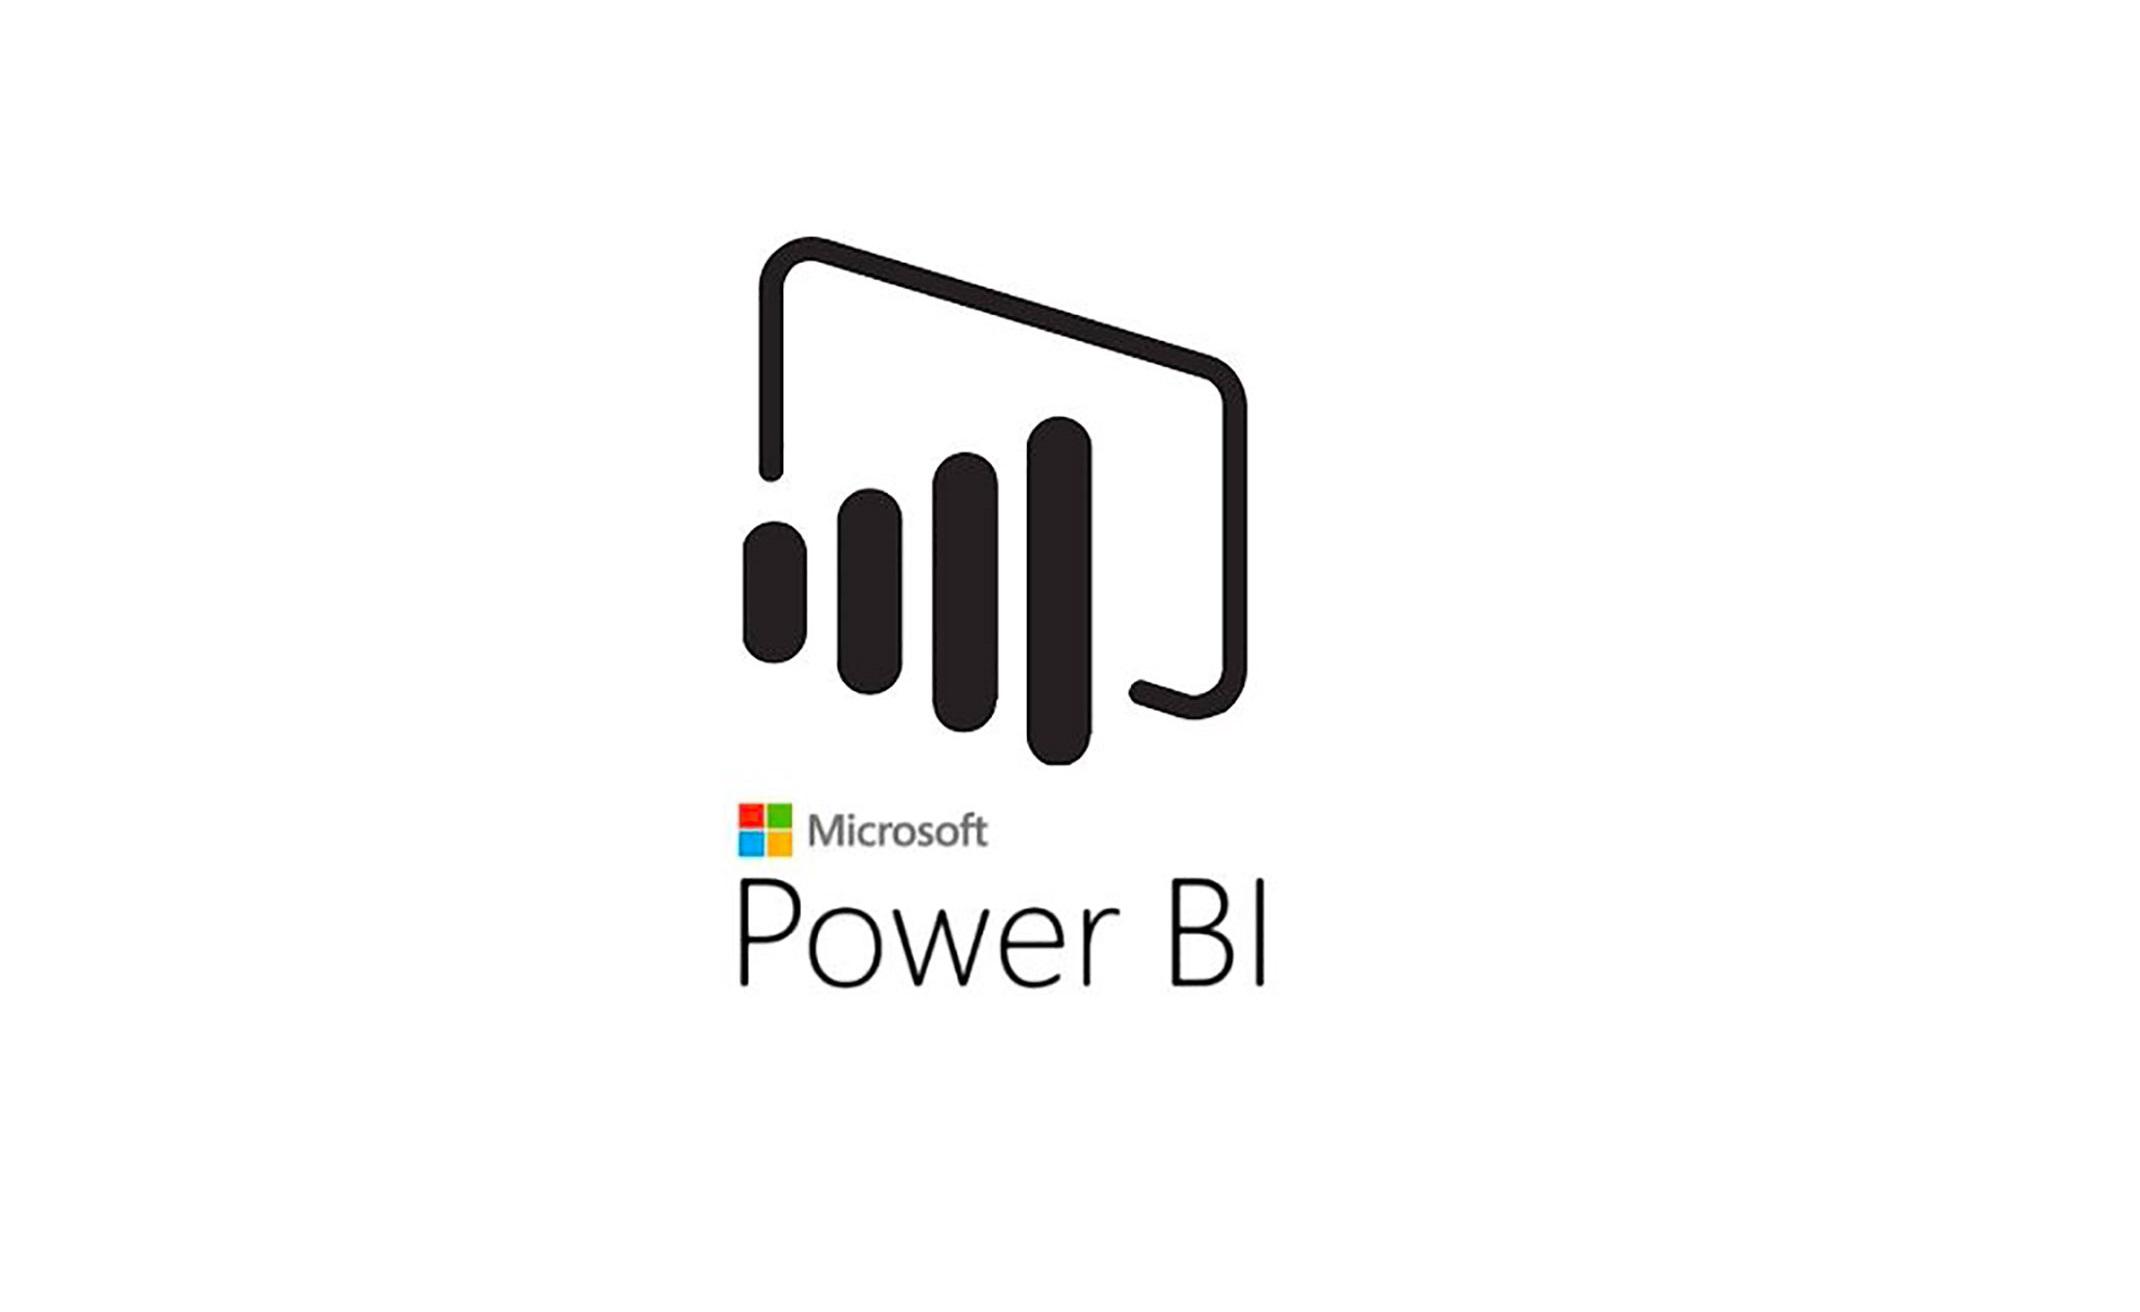 Microsoft Power BI Training in Mesa | Introduction to Power BI training for beginners | Getting started with Power BI | What is Power BI | January 20, 2020 - February 12, 2020